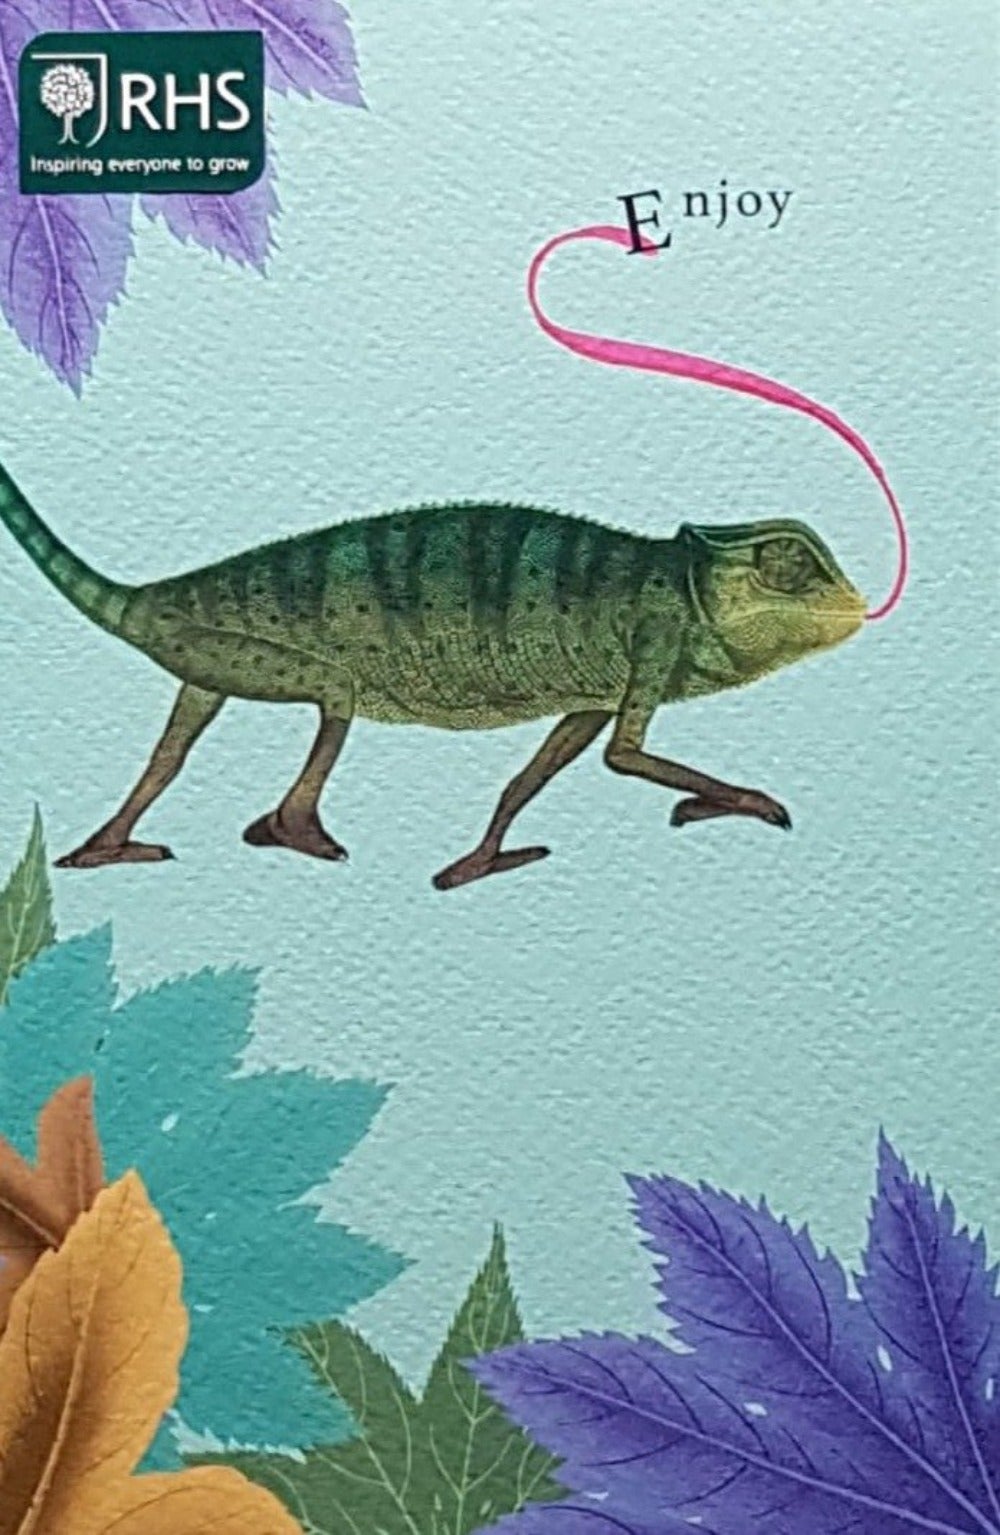 Blank Card - A Chameleon Sticking The Tongue Out And Saying 'Enjoy'